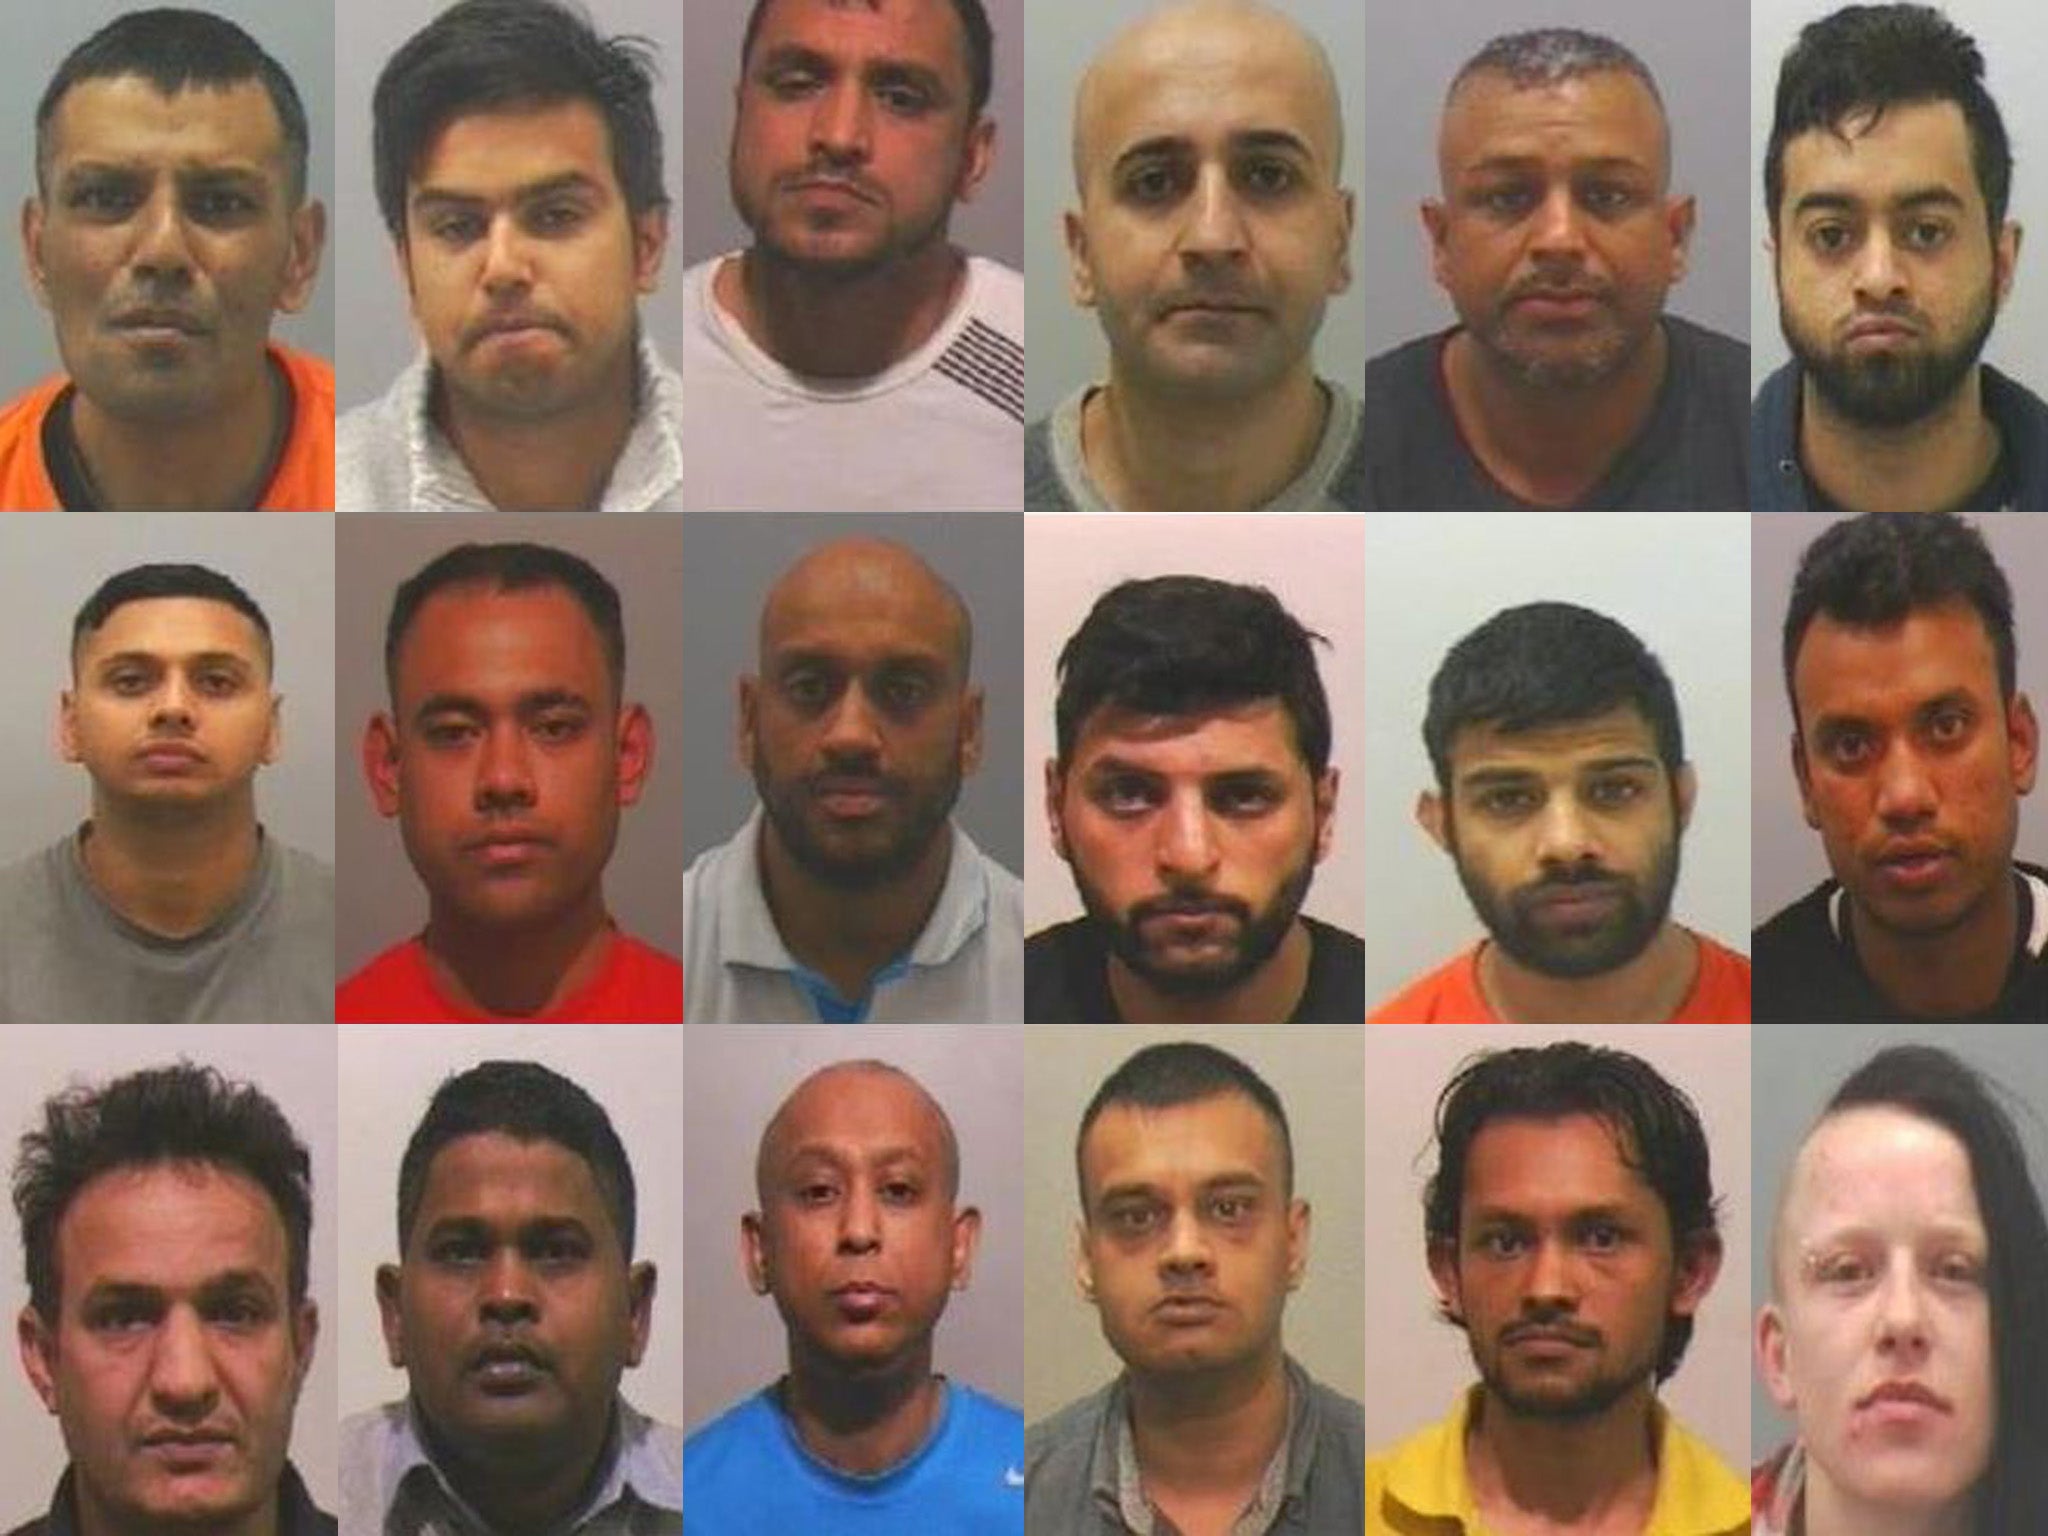 The 18 members were convicted of offences including rape, assault, supplying drugs and trafficking for prostitution